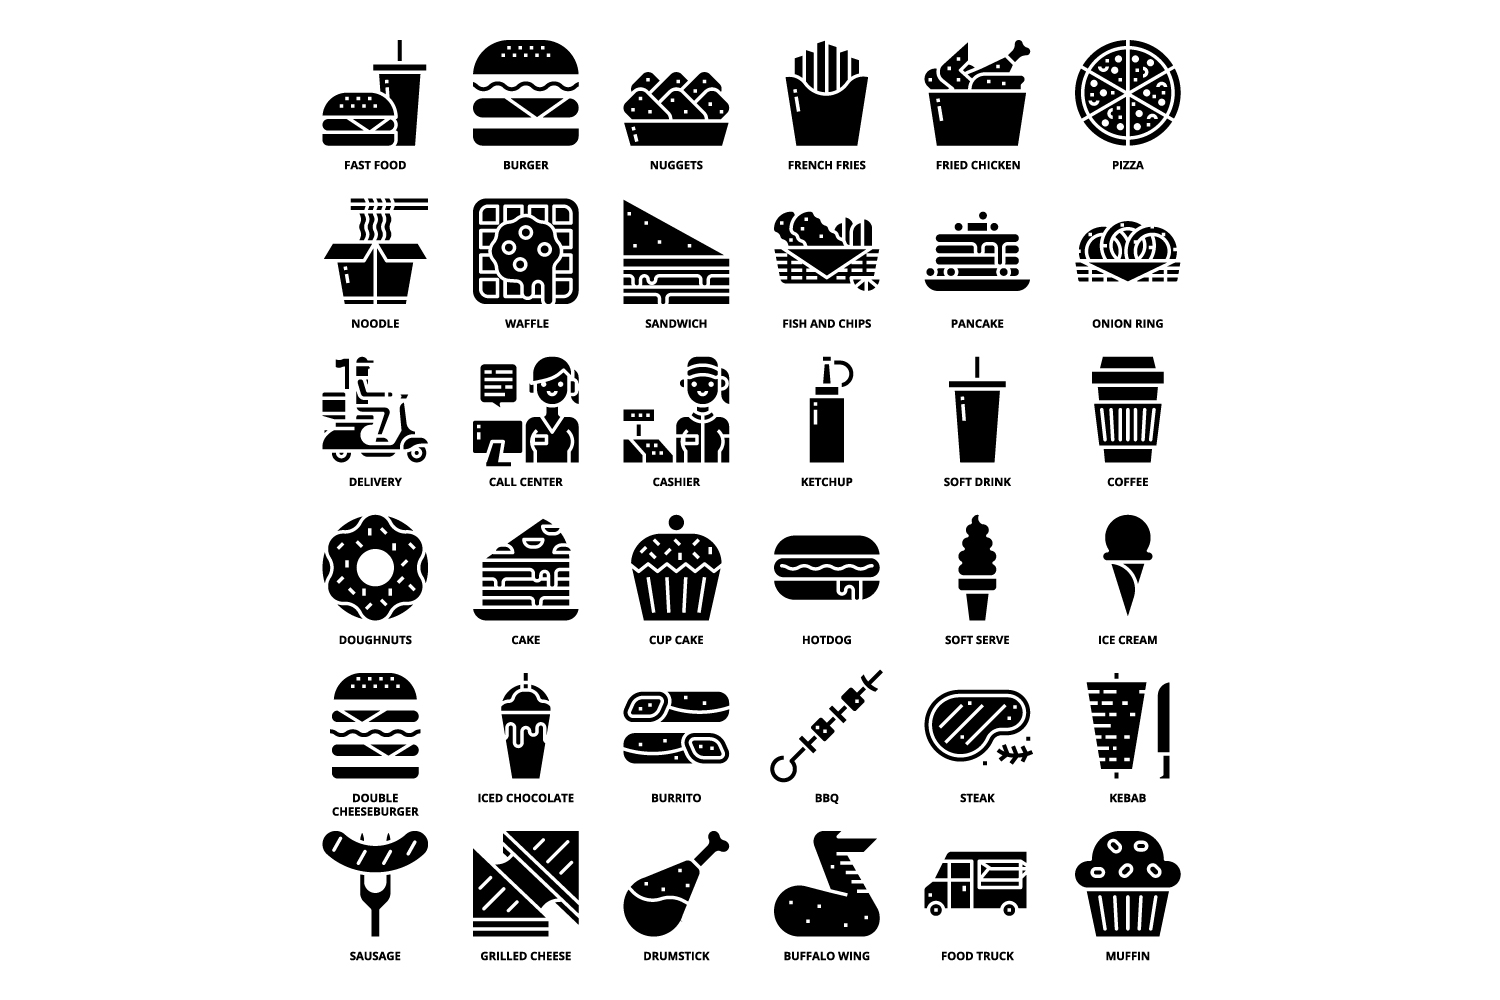 Black and white poster with different types of food.